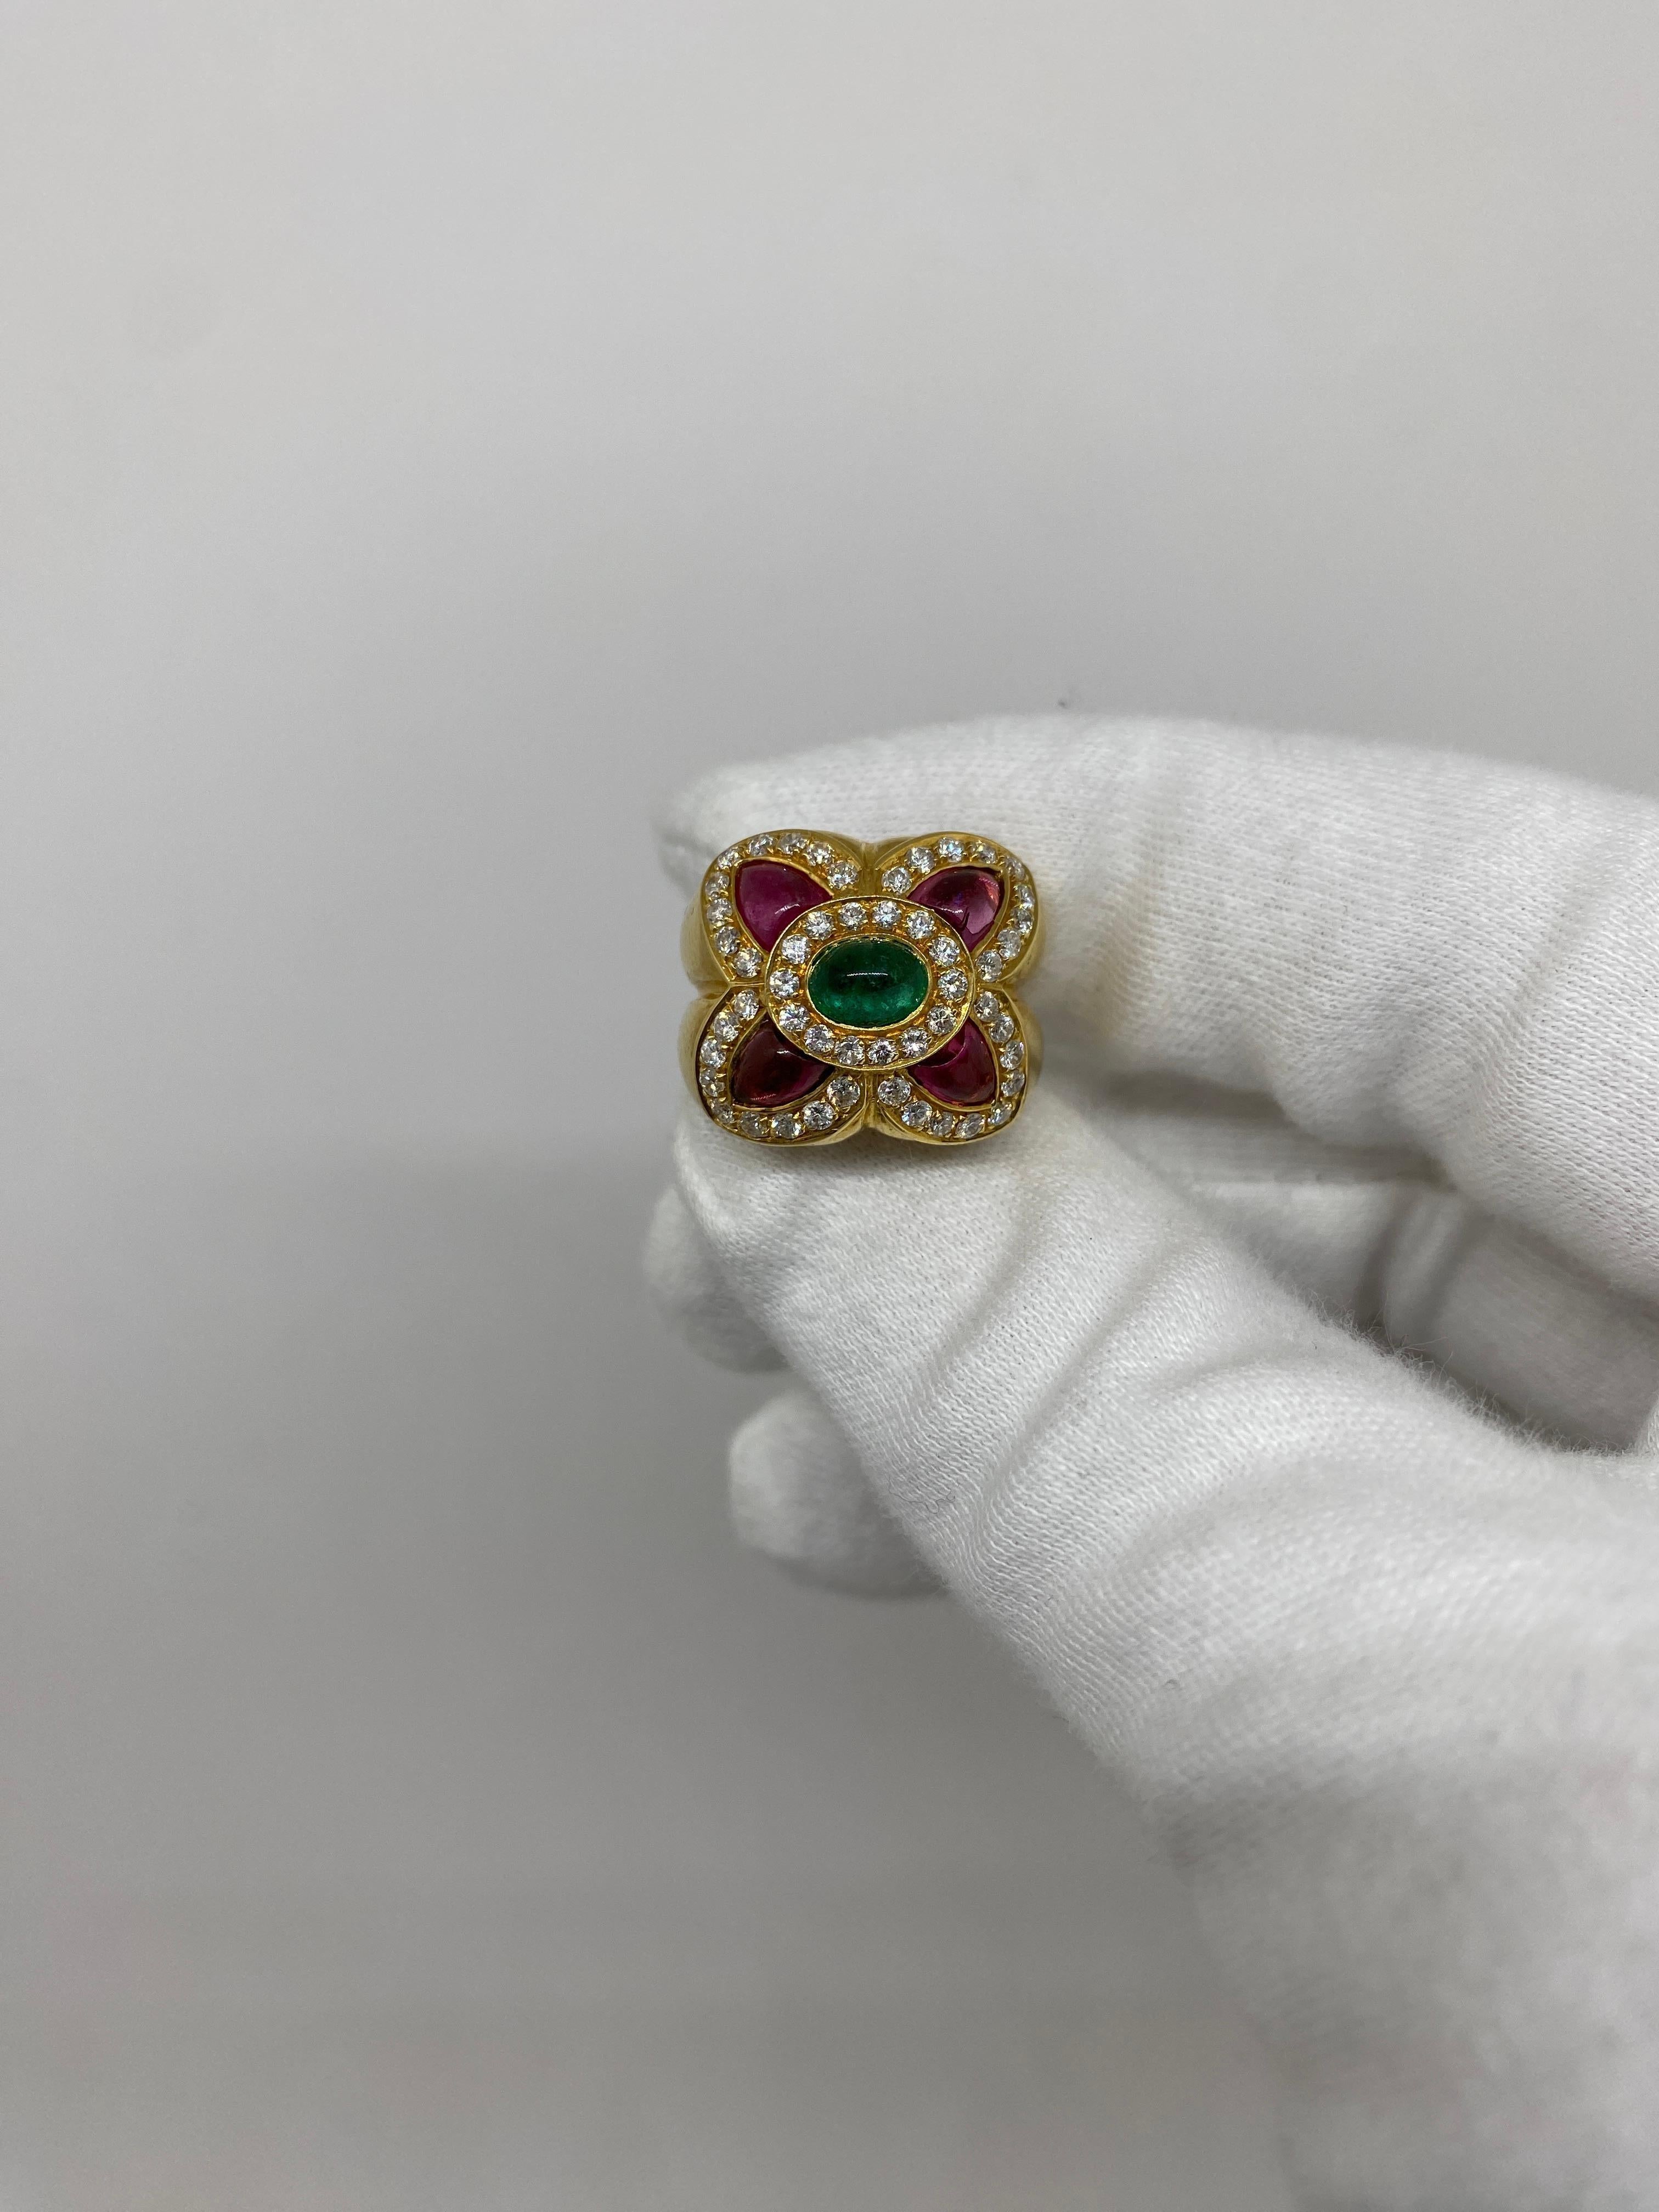 Ring made of 18kt yellow gold with pink and green tourmalines and natural white brilliant-cut diamonds

Welcome to our jewelry collection, where every piece tells a story of timeless elegance and unparalleled craftsmanship. As a family-run business